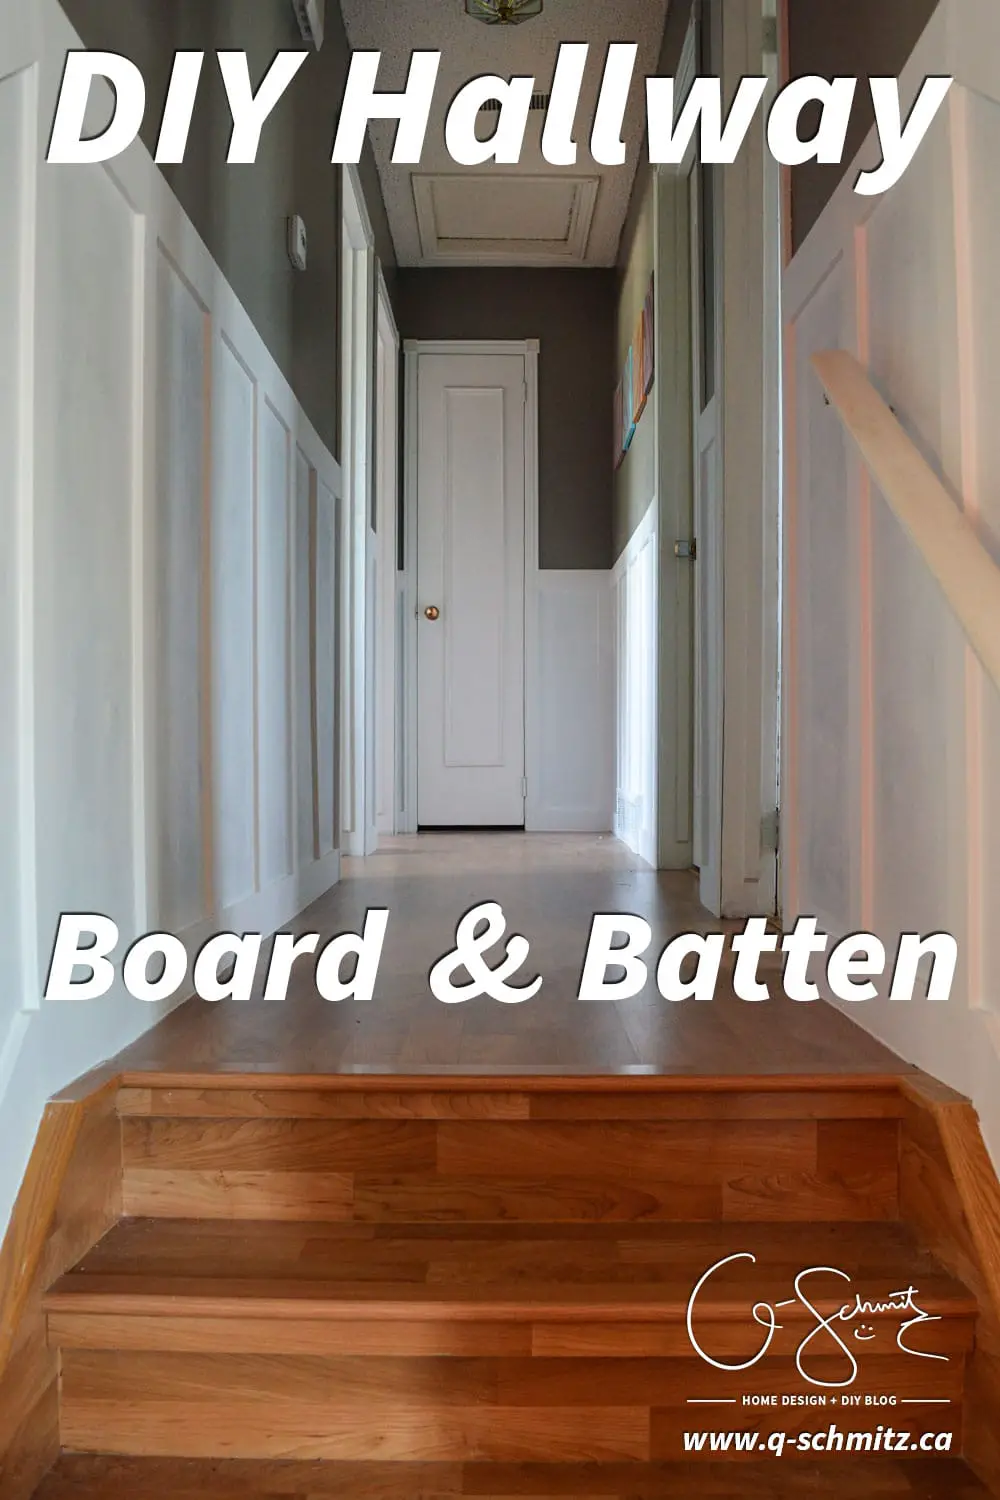 Do you have any millwork in your house? There are so many different styles, and almost no limits to what can be achieved with a few coats of paint and some pieces of trim! Here's an overview of how I was able to add board and batten style millwork to our hallway.